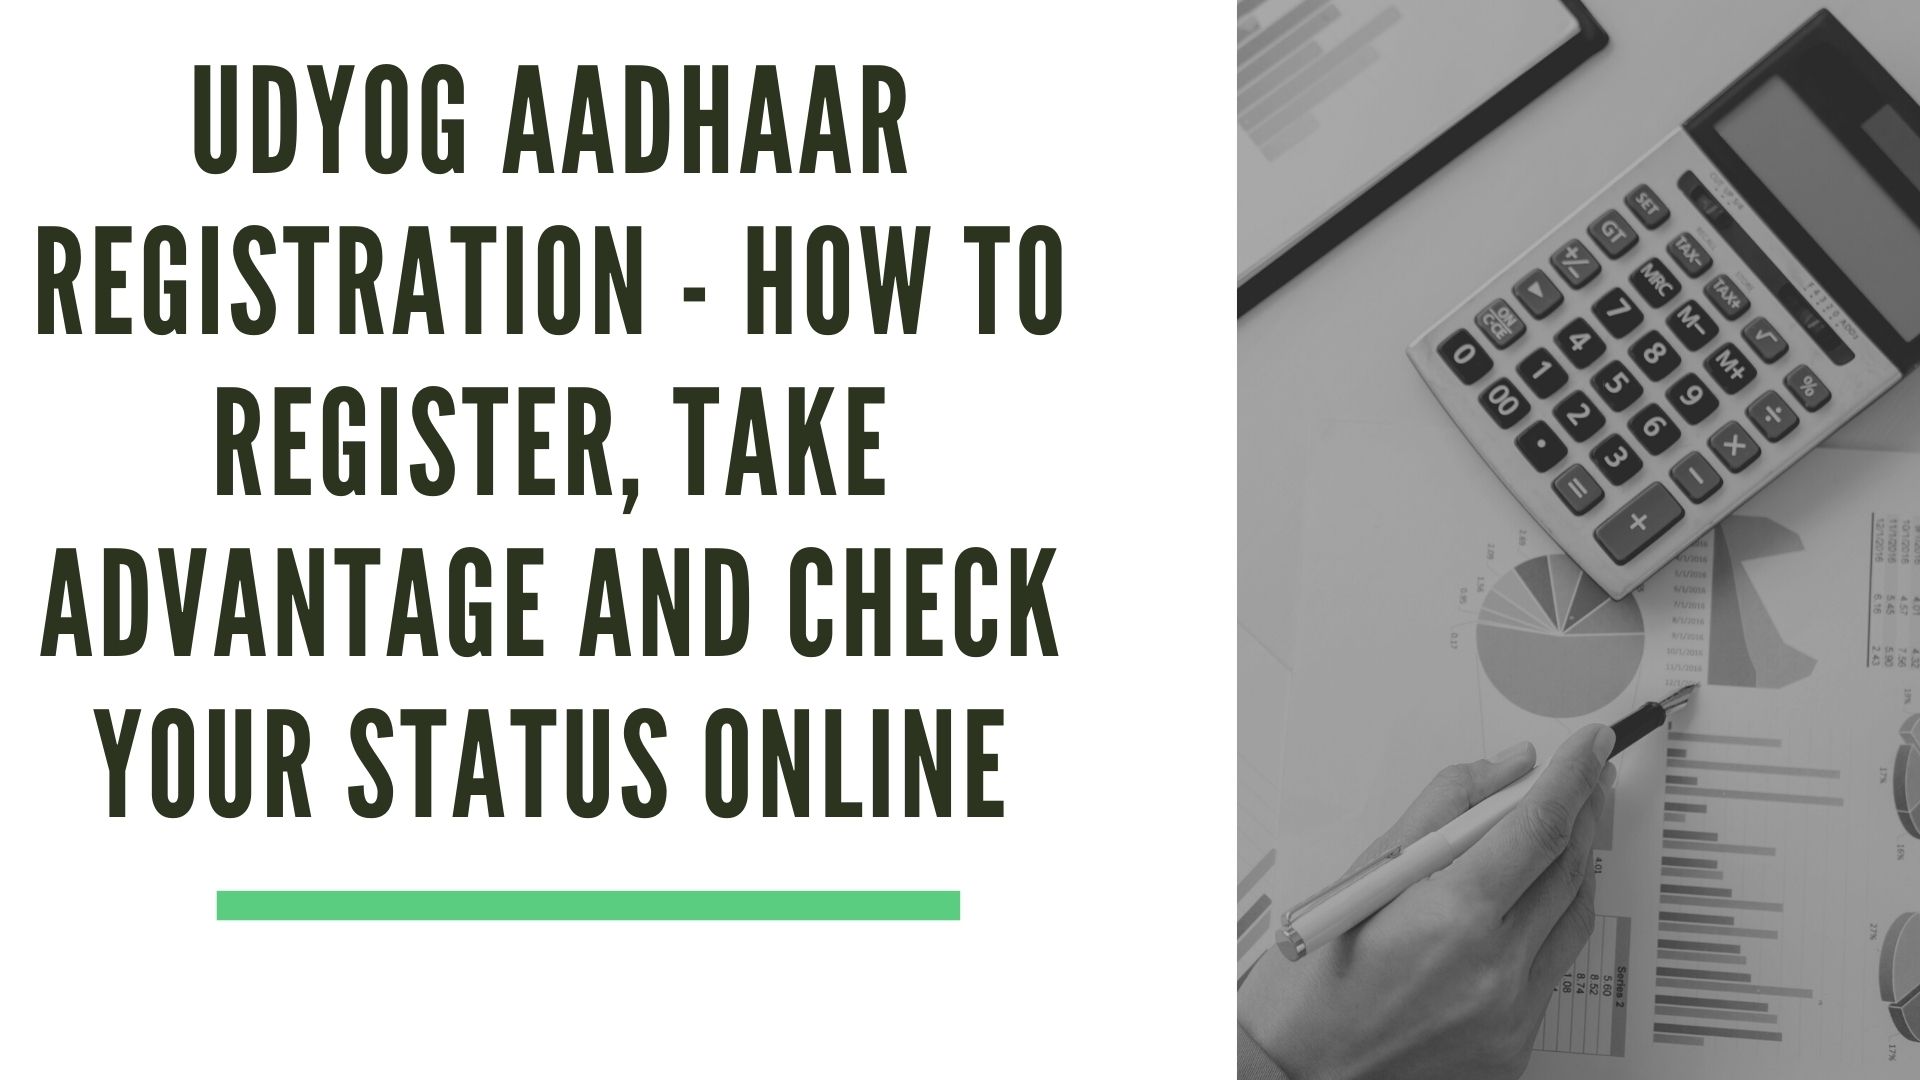 Udyog Aadhaar Registration - How to register, take advantage and check your status online